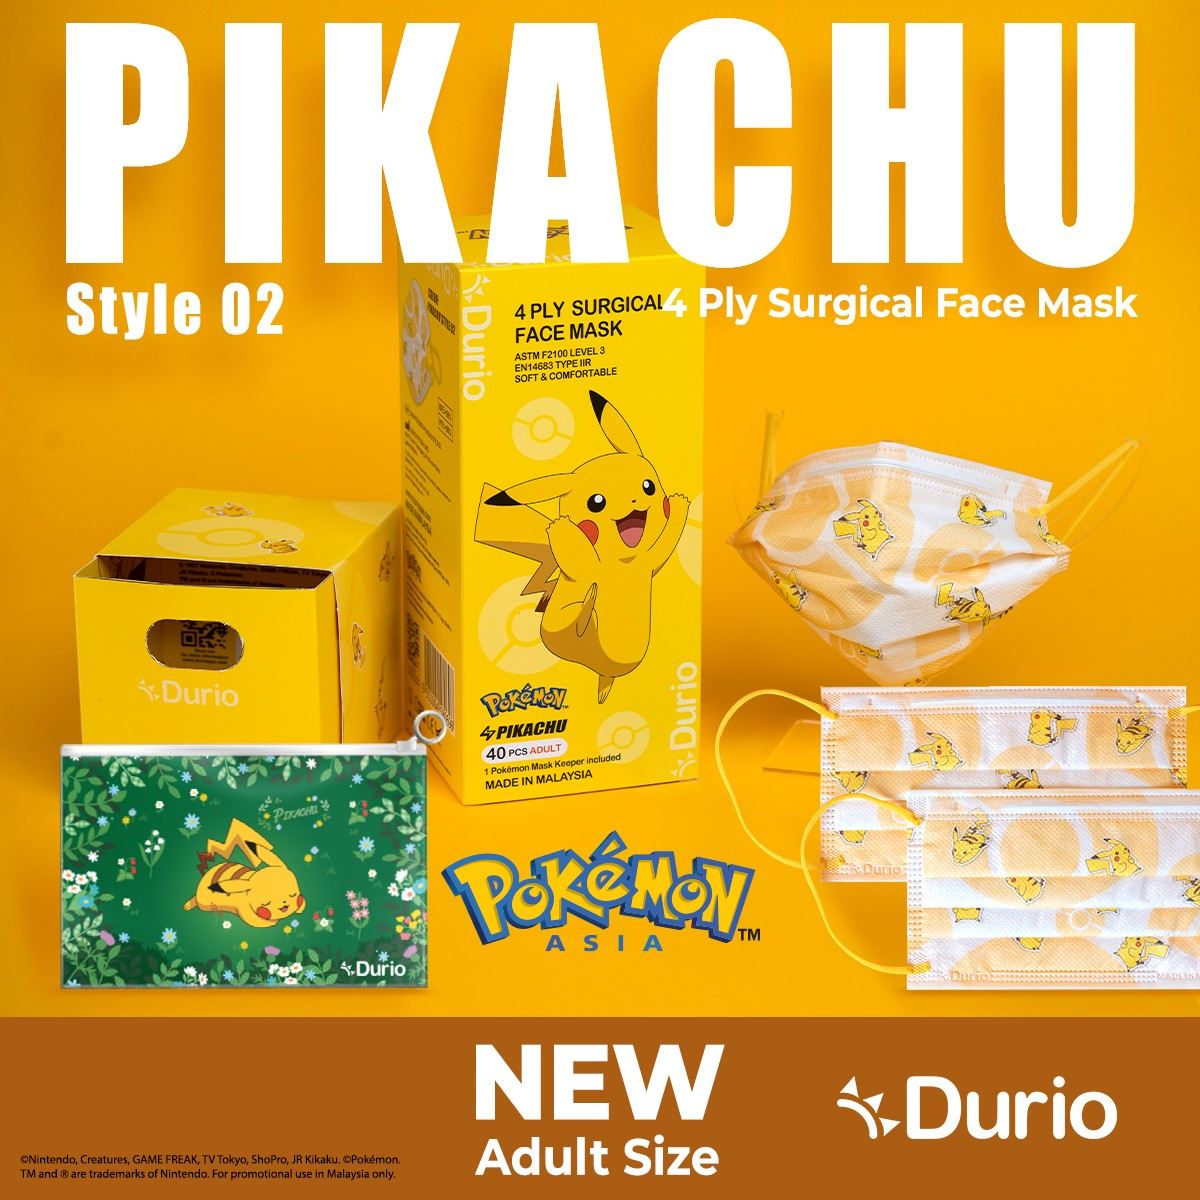 Durio 546A Pokemon Adult 4 Ply Surgical Face Mask 40s Pikachu Style 02 - DoctorOnCall Online Pharmacy